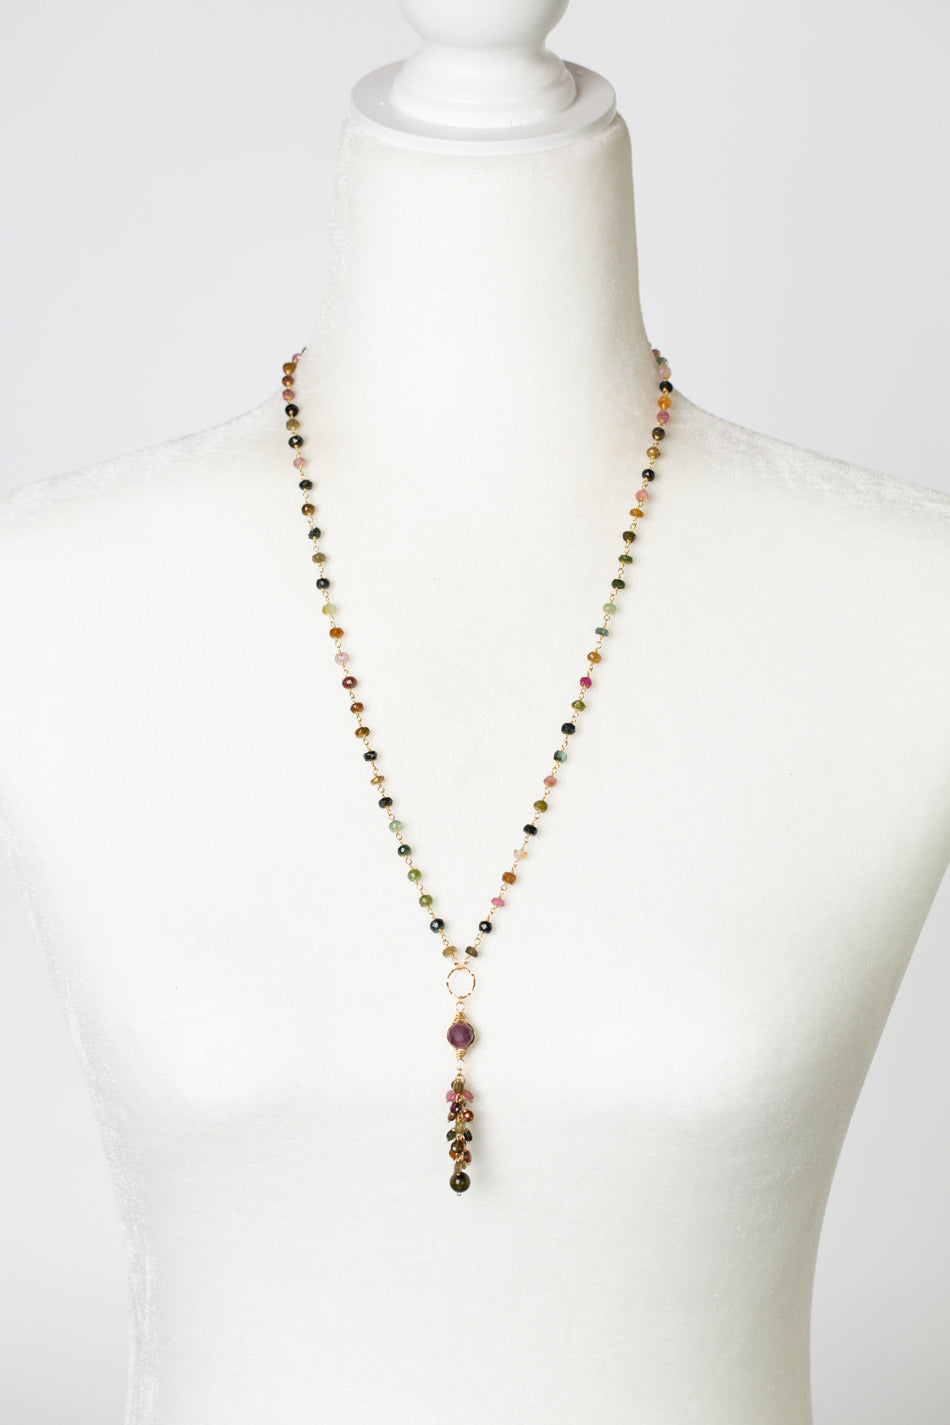 Limited Edition 23.5-25.5" Herringbone Faceted Ruby Focal With Tourmaline Dangles Cluster Necklace